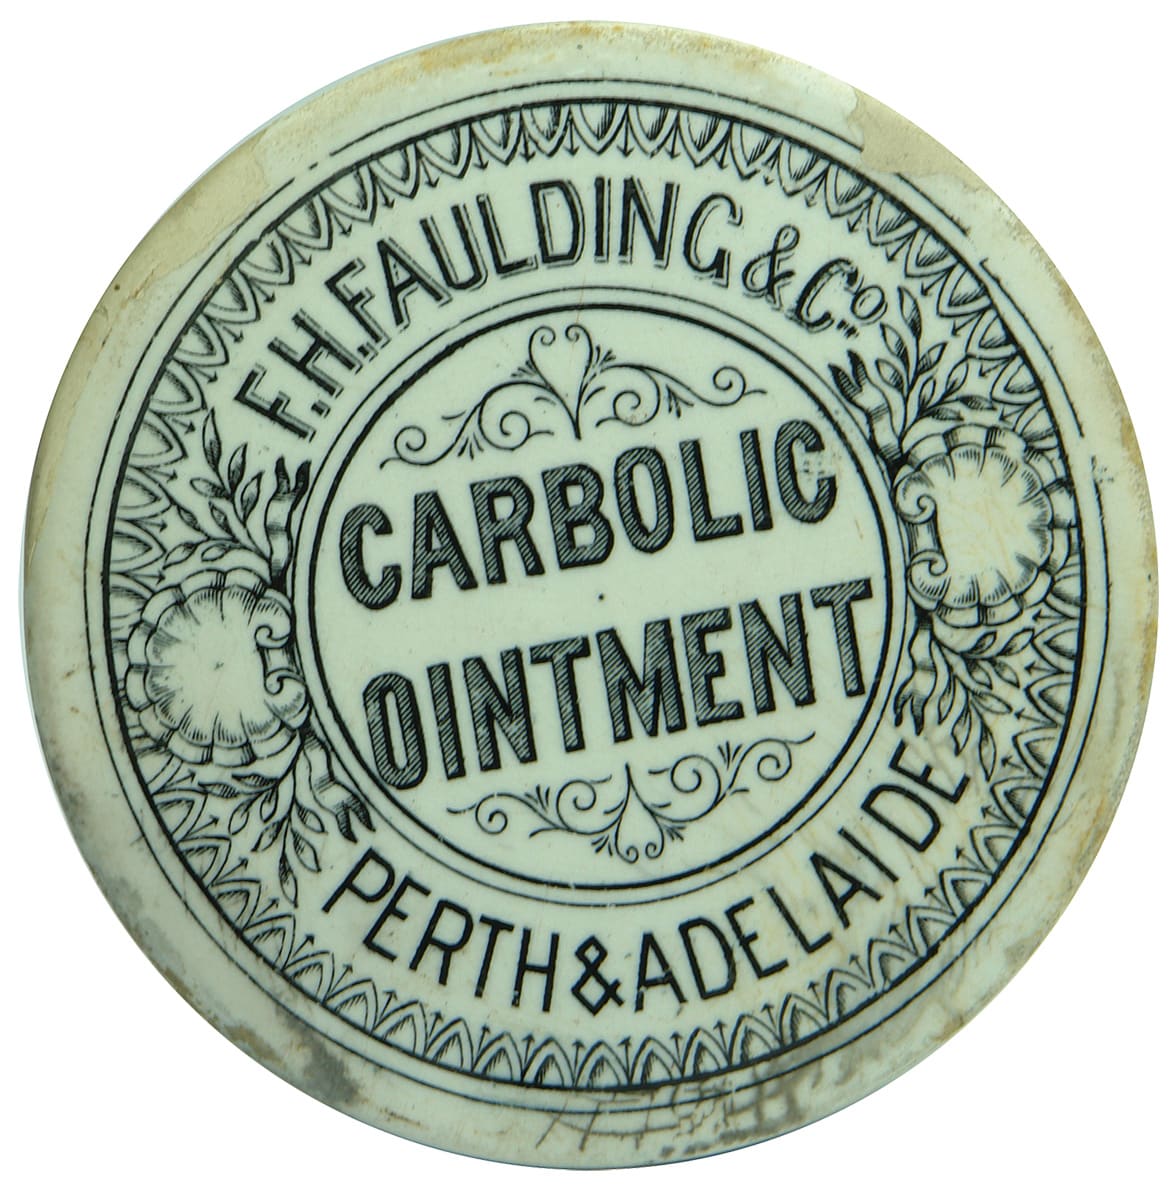 Faulding Carbolic Ointment Perth Adelaide Pot Lid